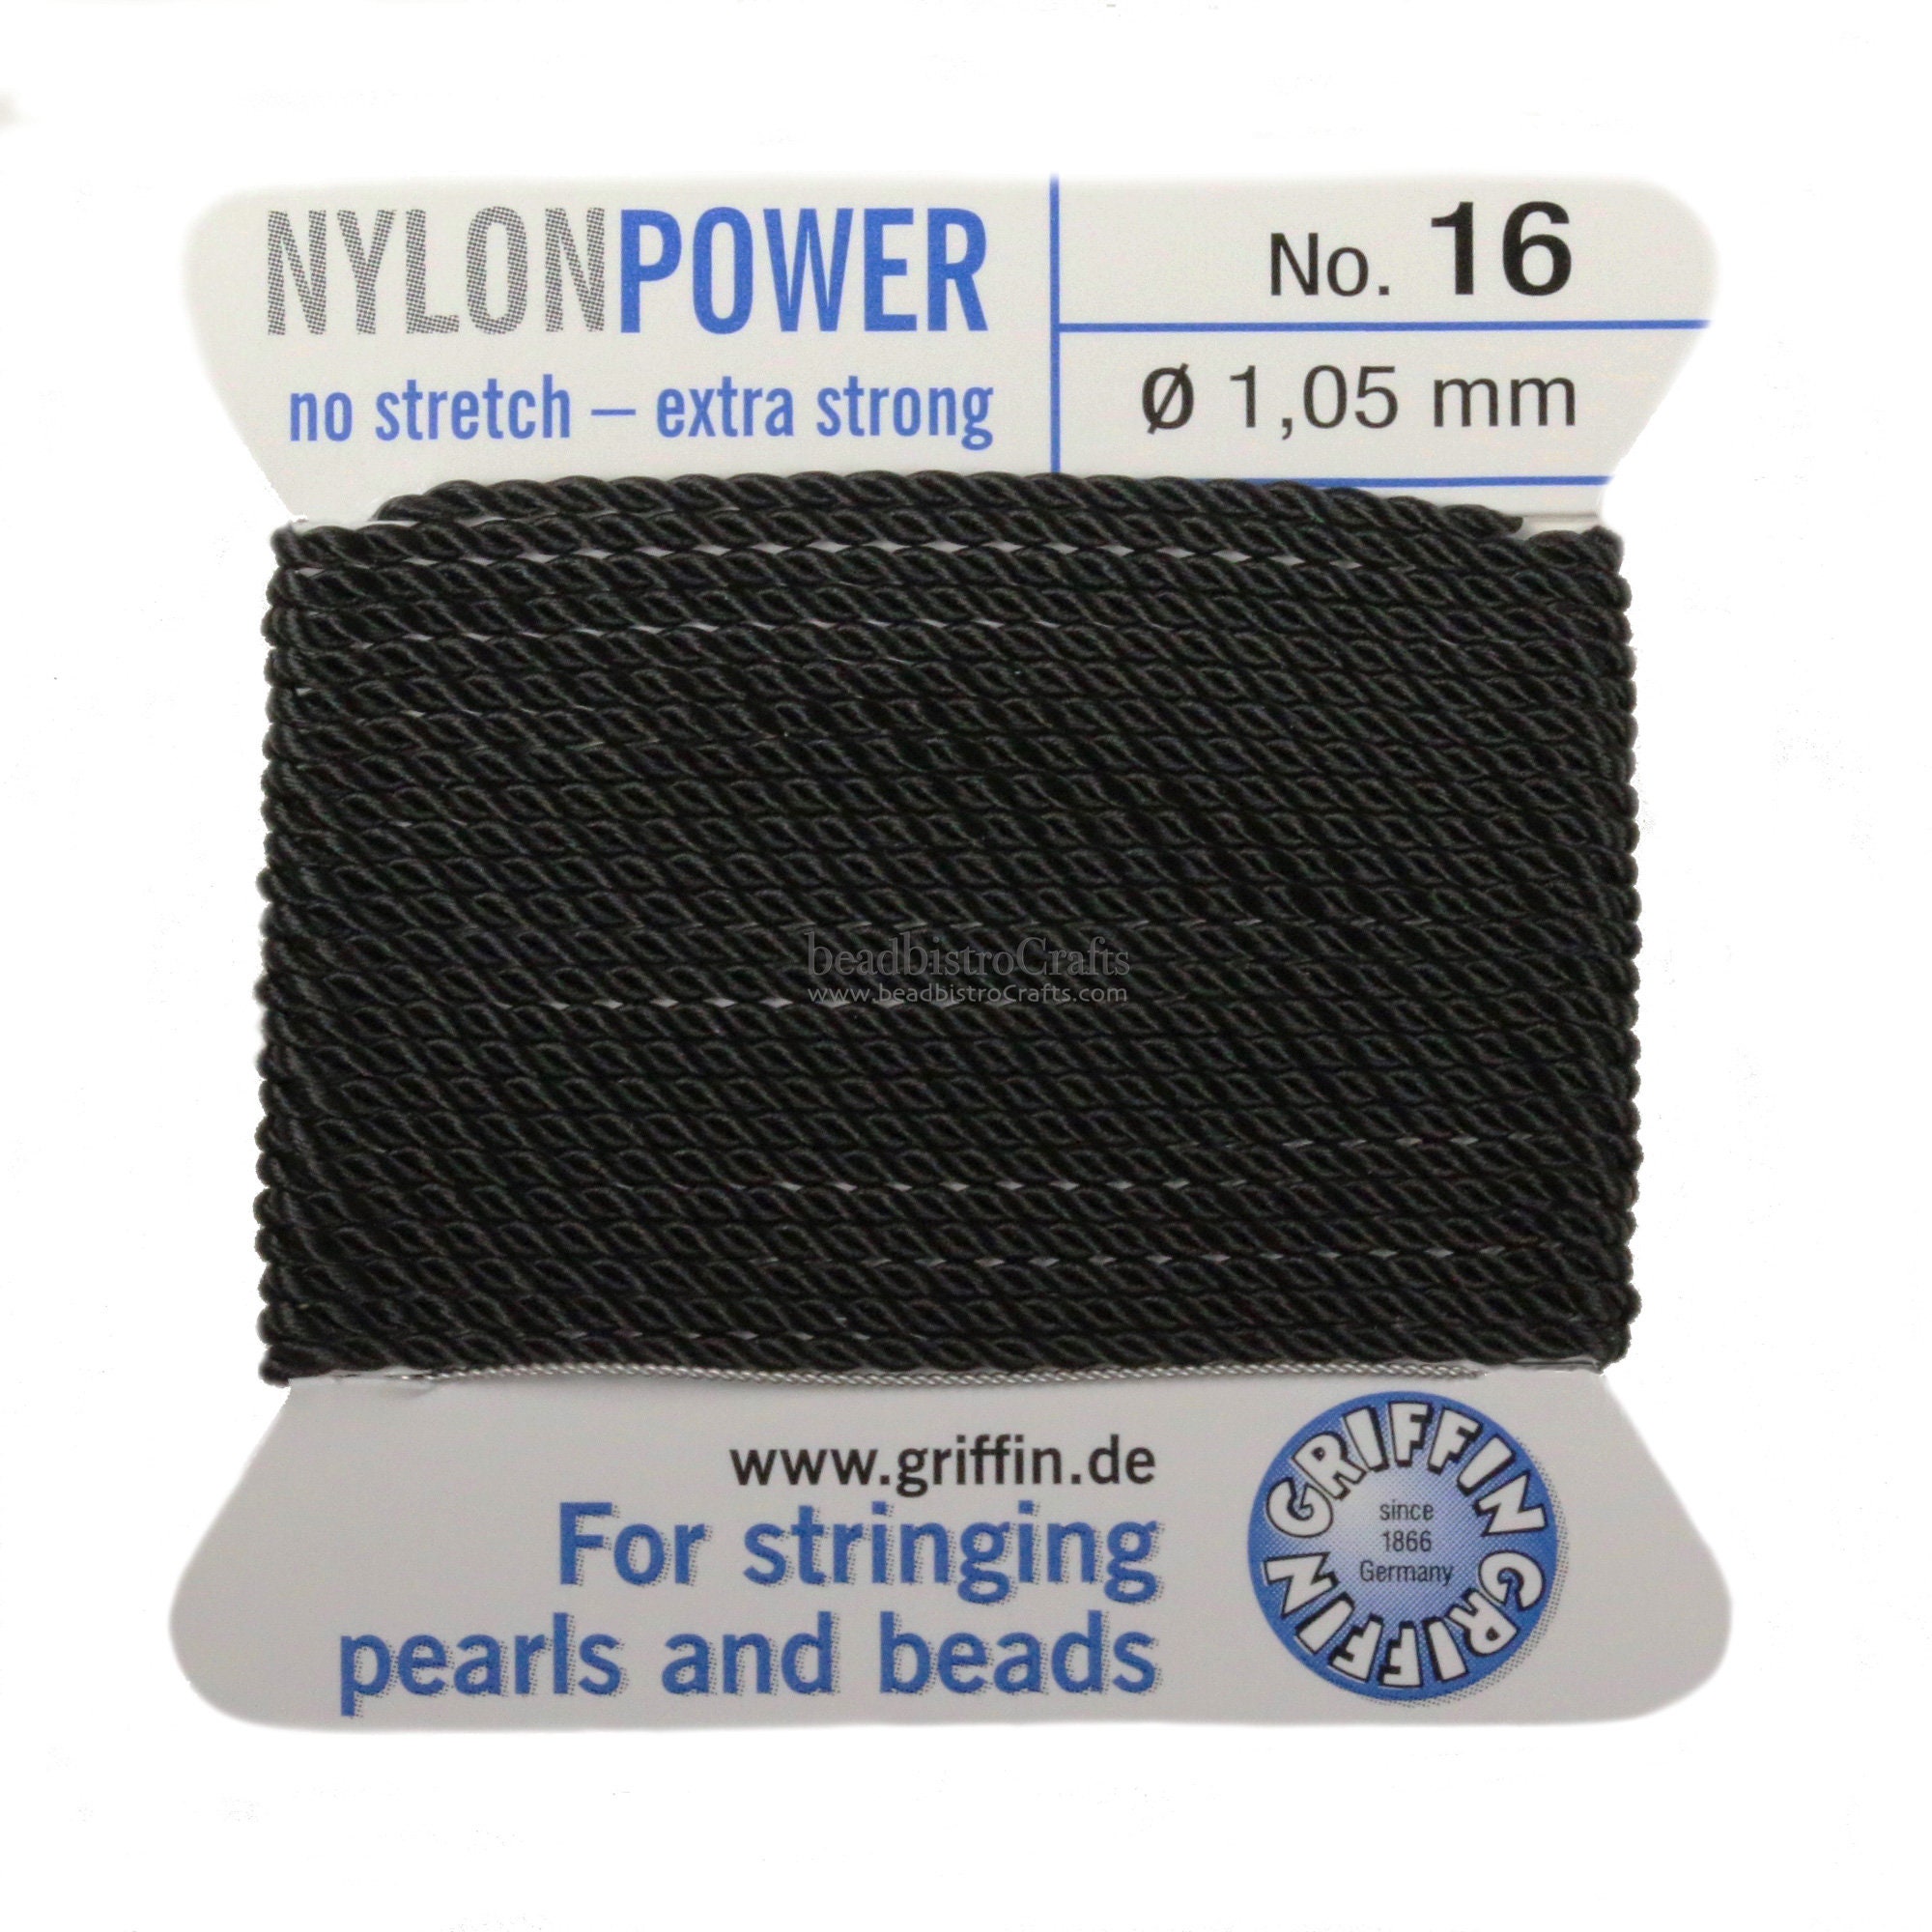 Nylonpower No. 16 CORD Griffin Nylon Beading Cord With Stainless